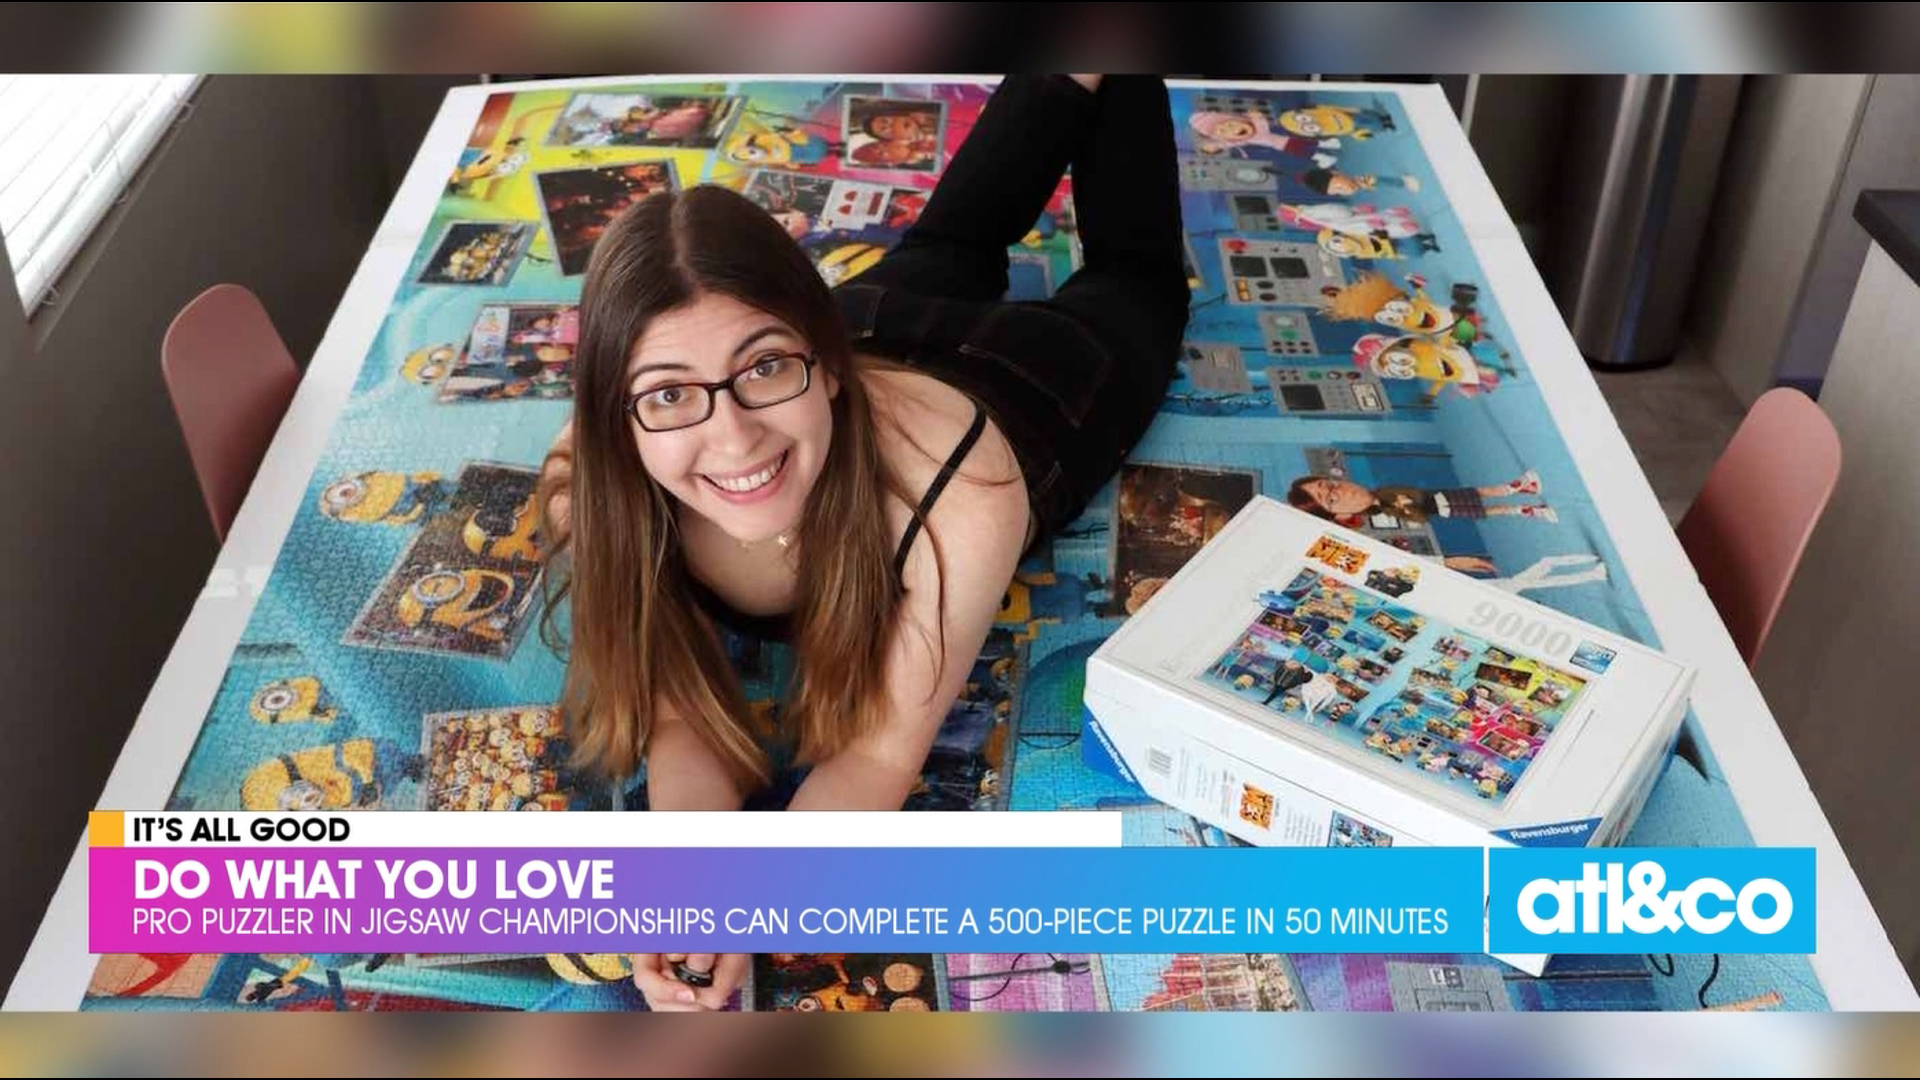 She can complete a 500-piece puzzle in 50 minutes!